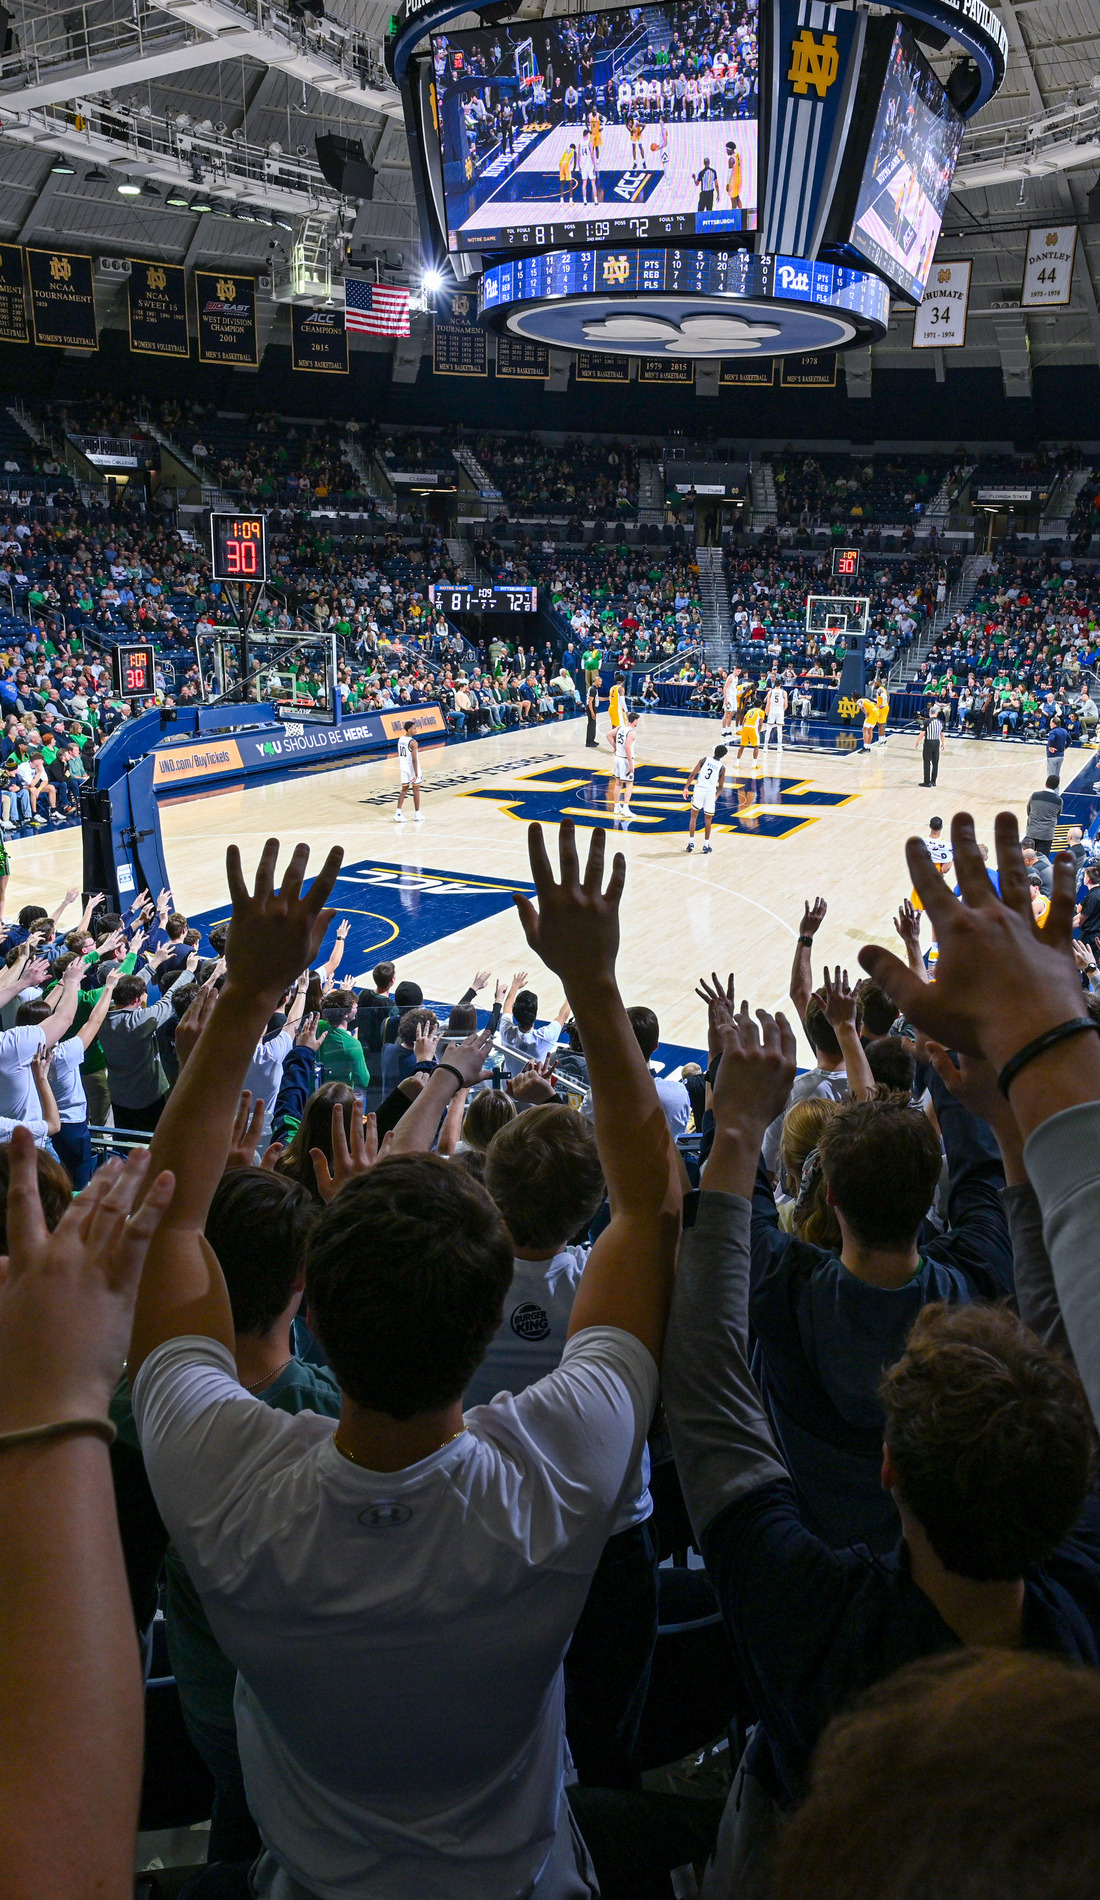 A Notre Dame Fighting Irish Basketball live event